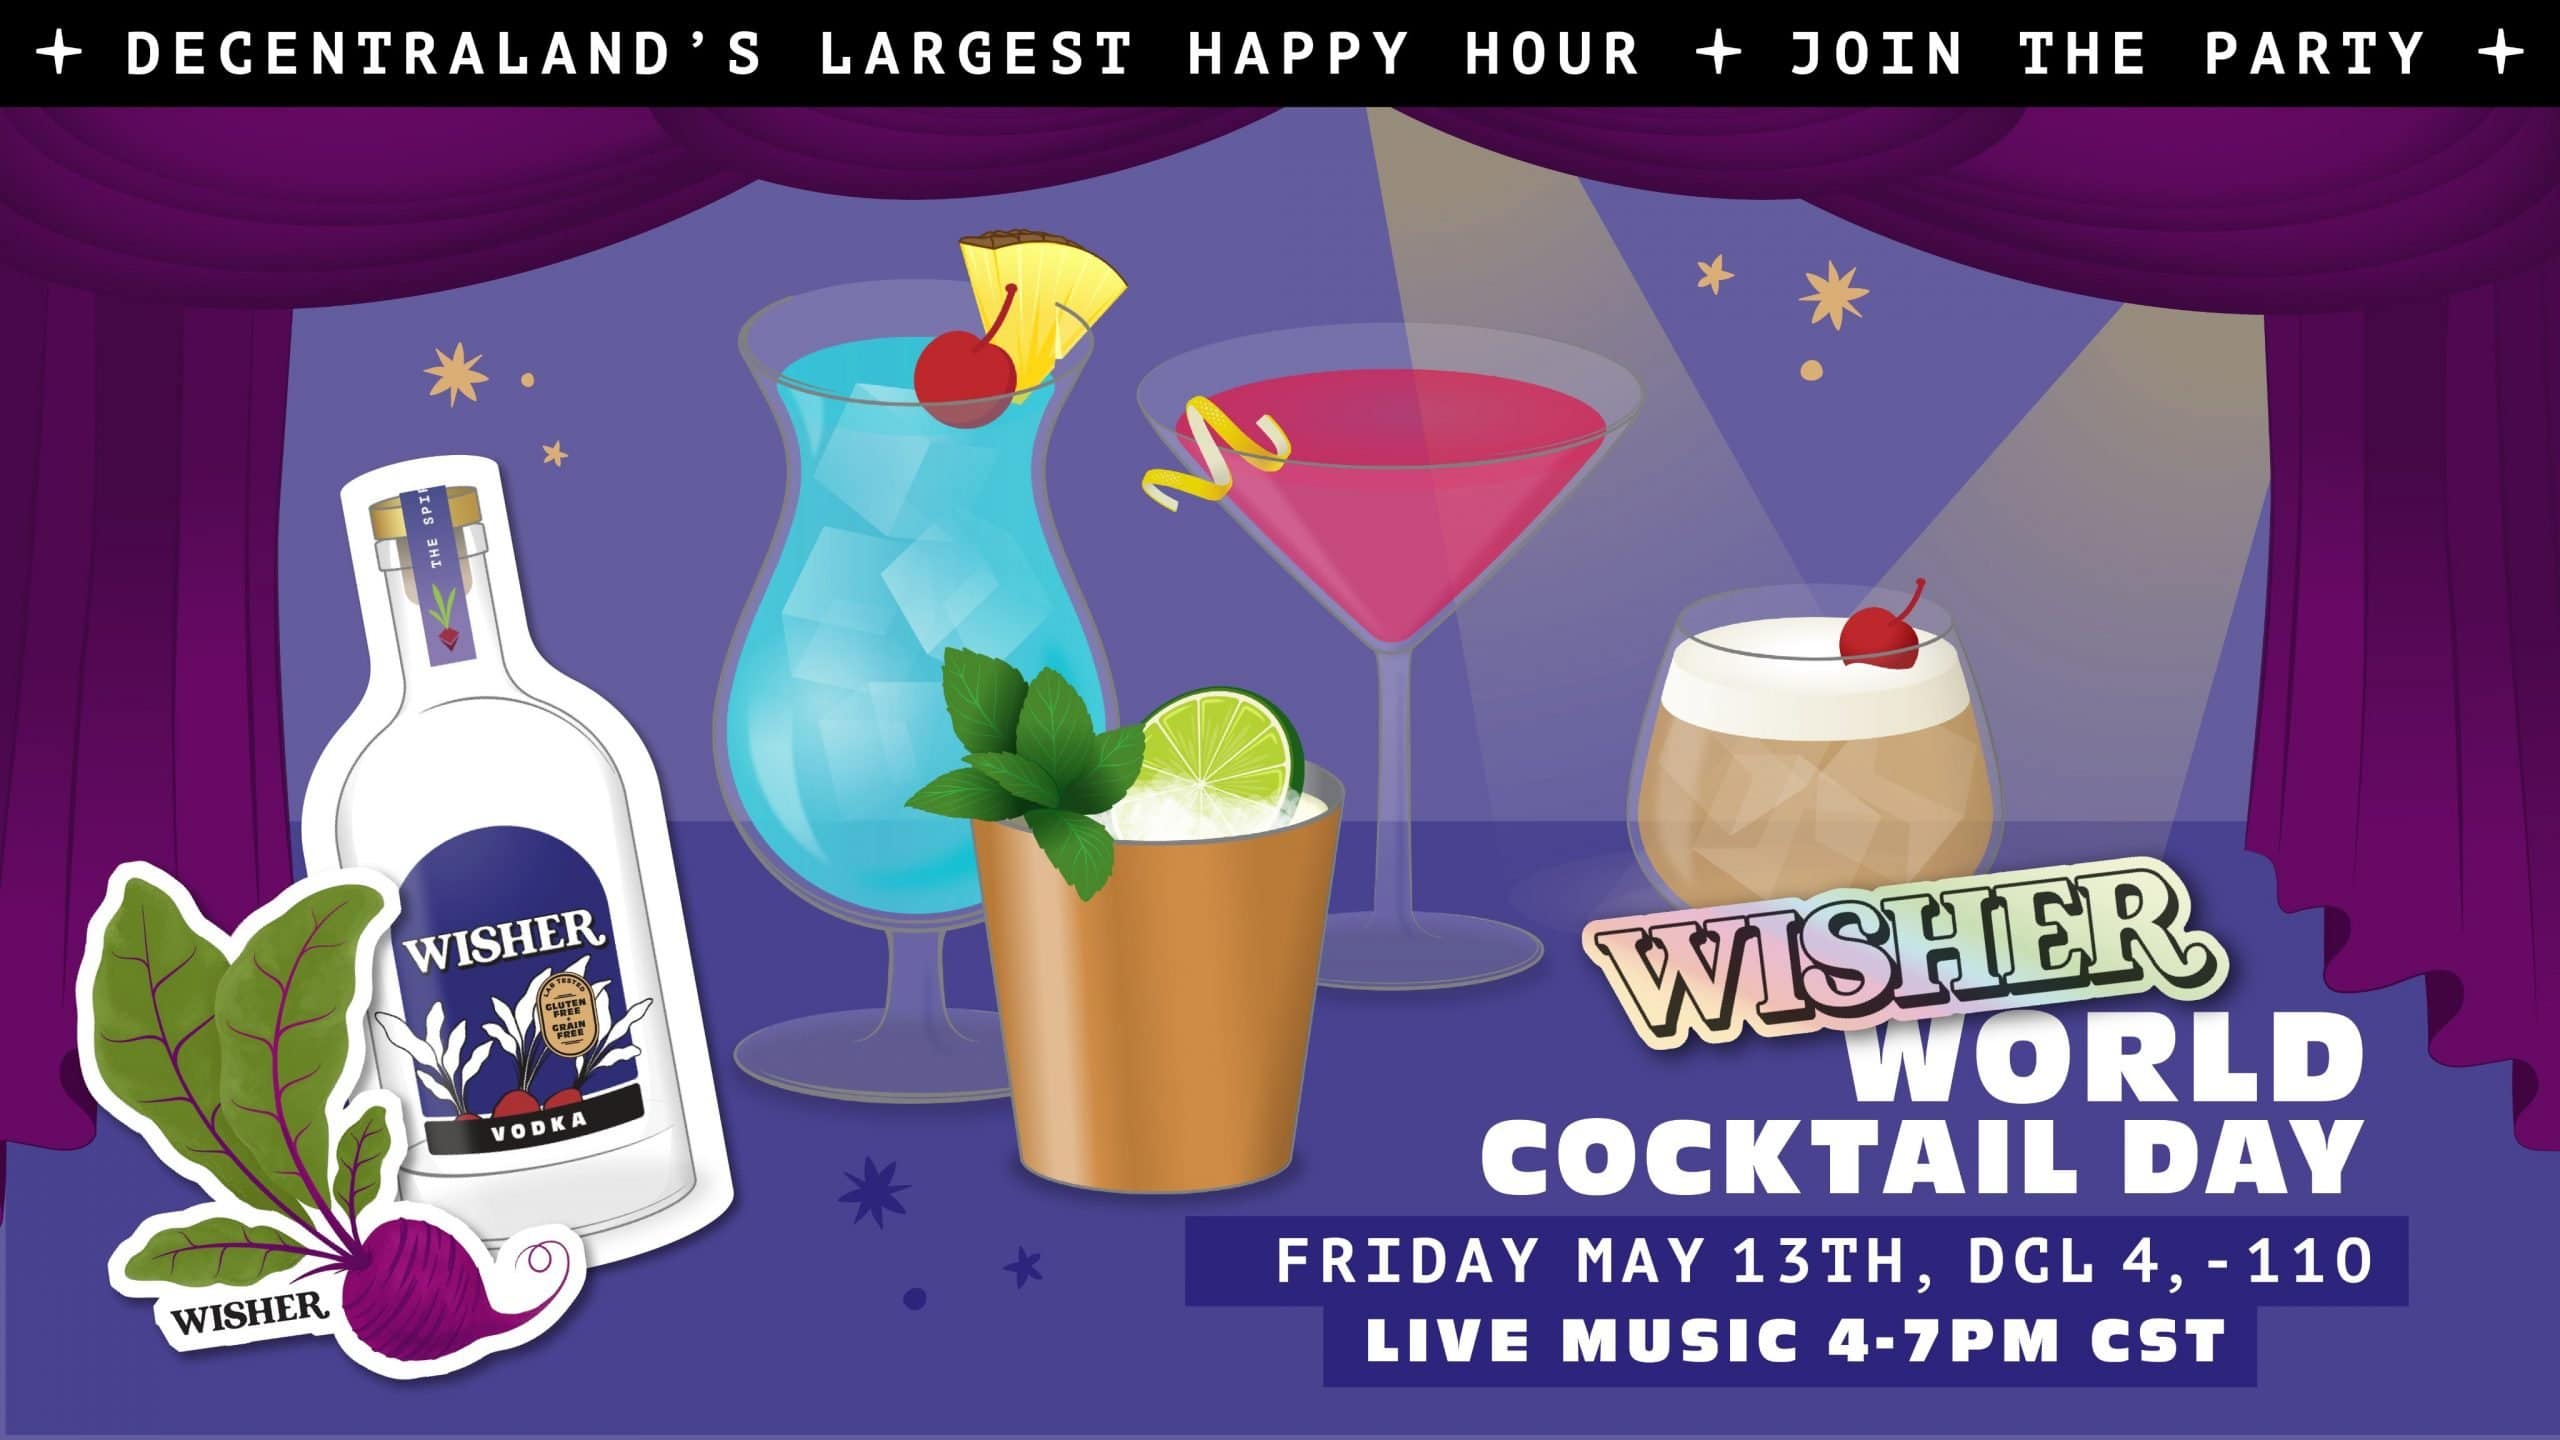 Wisher Vodka Metaverse party poster